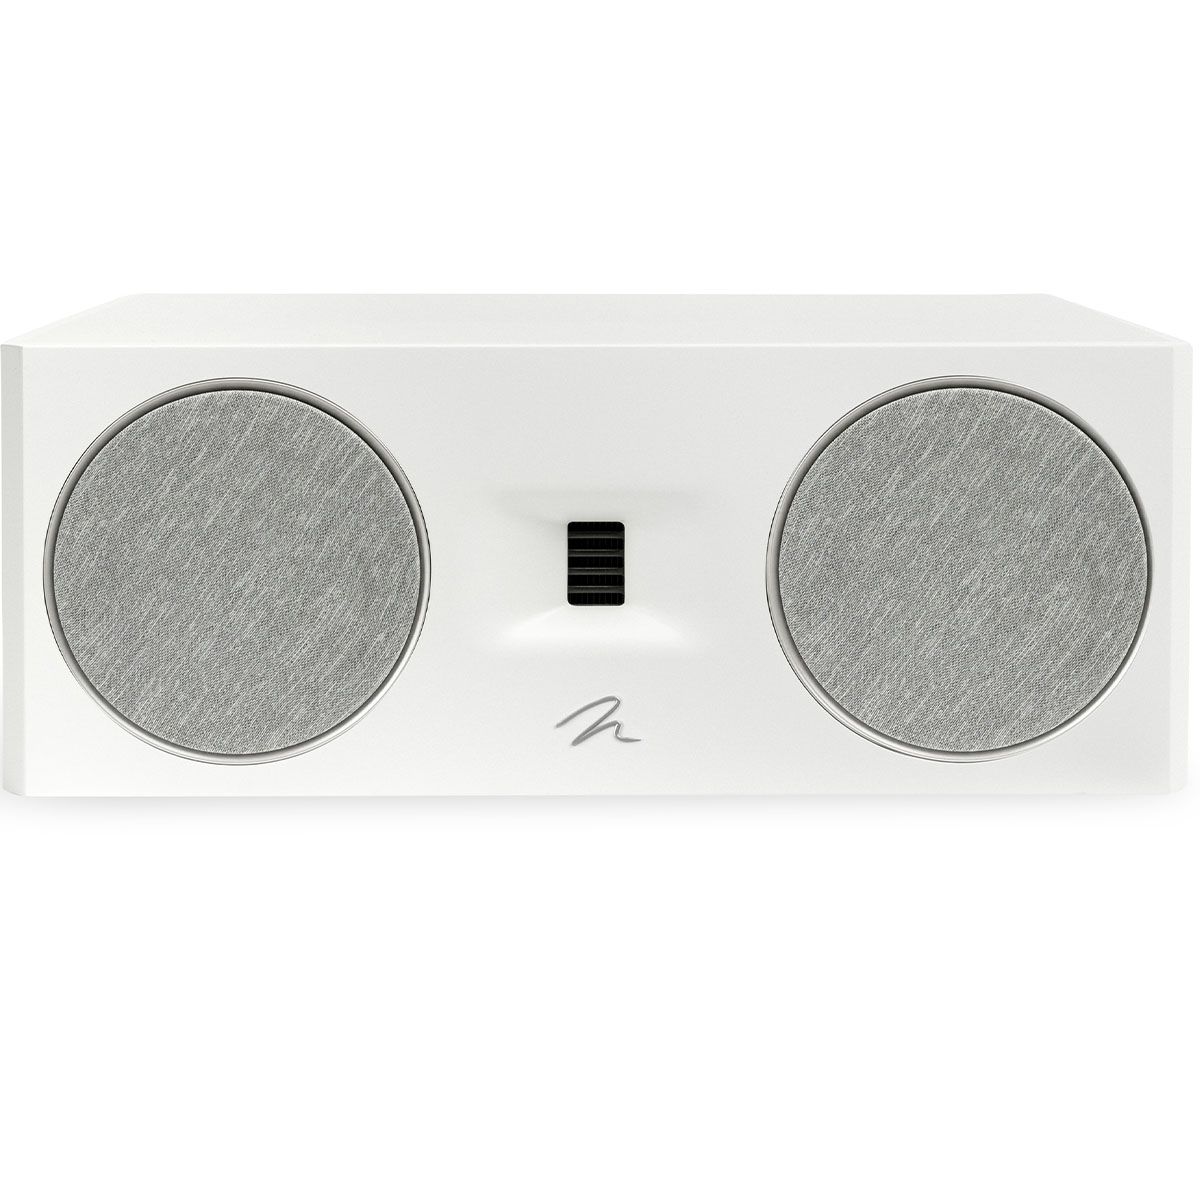 MartinLogan Motion C10  Bookshelf Speaker in white front angled view with grilles on white background